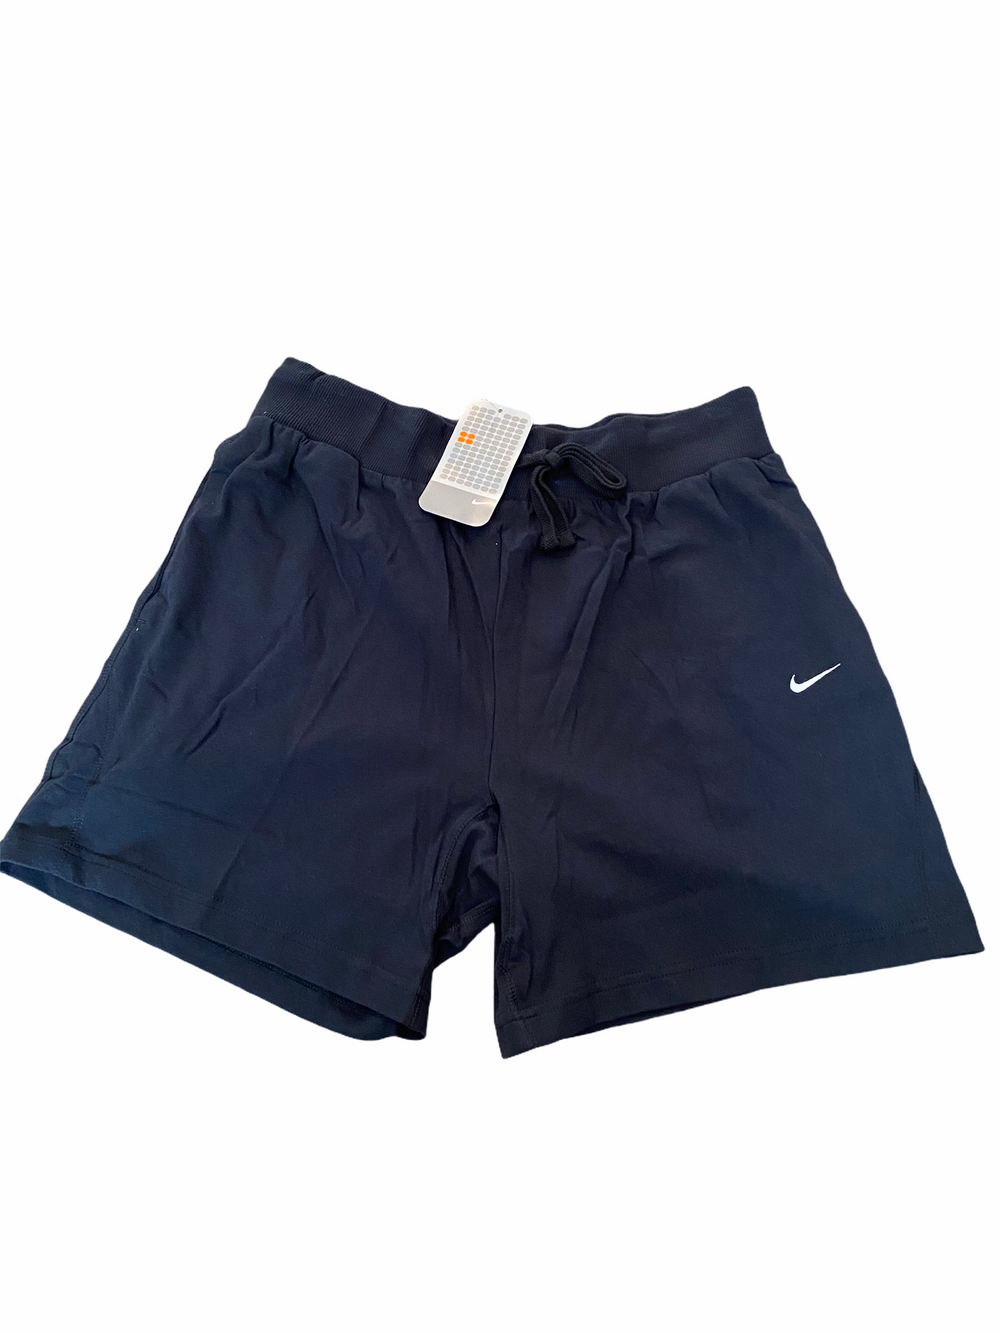 Early 2000s Nike Cotton Shorts in Black - Not In Your Wardrobe™ - [Vendor]